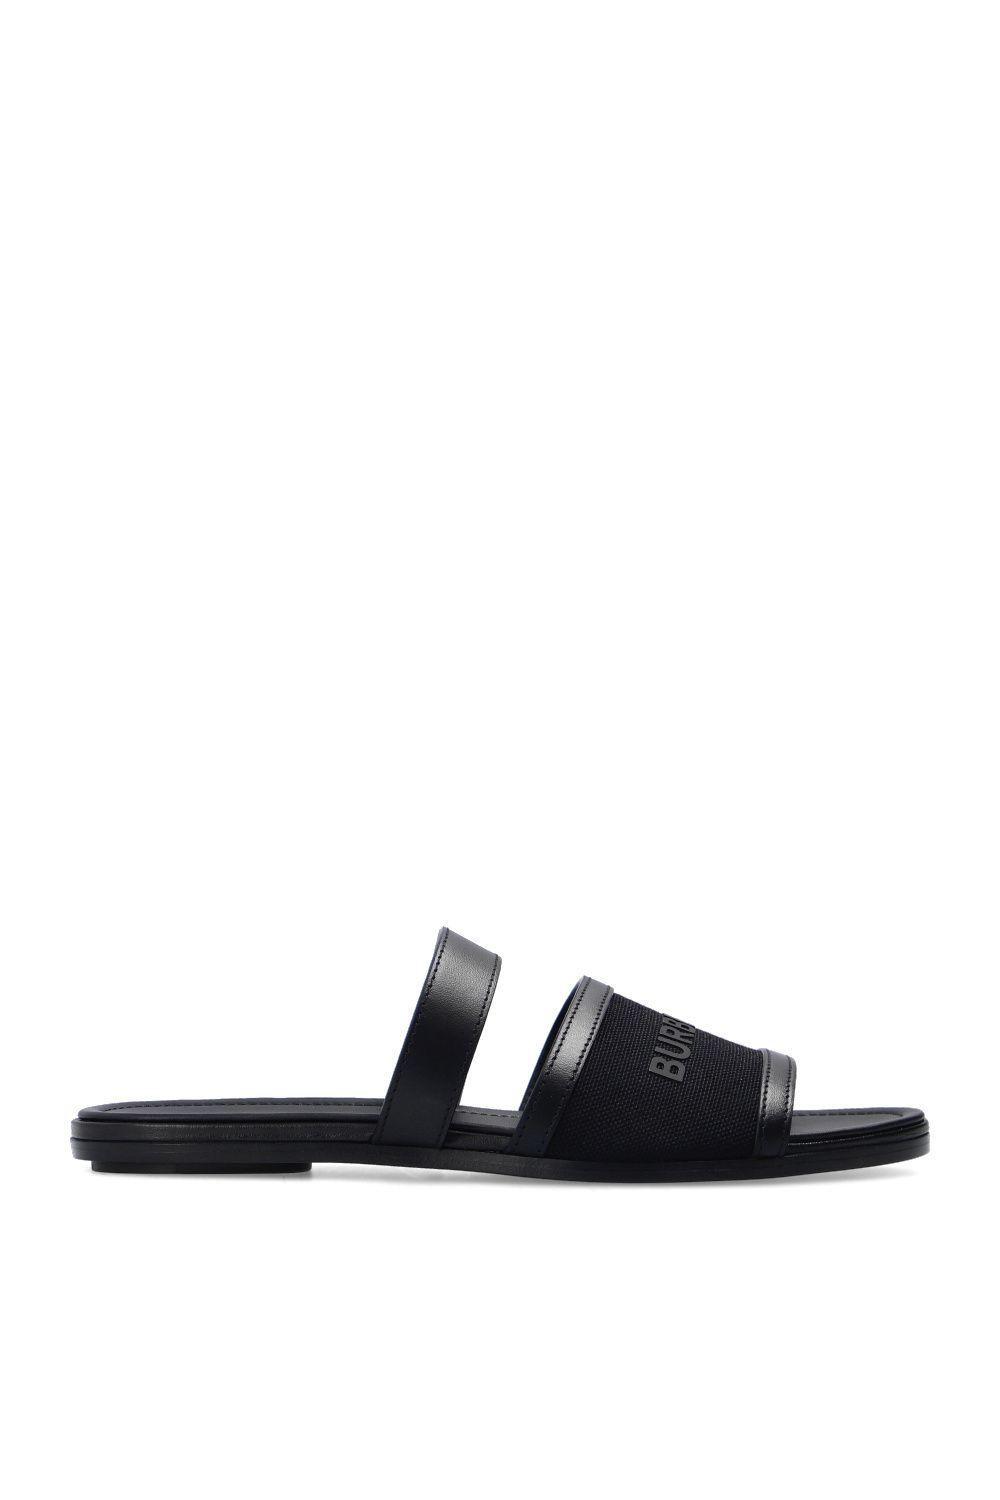 Burberry Slides With Logo in Black | Lyst